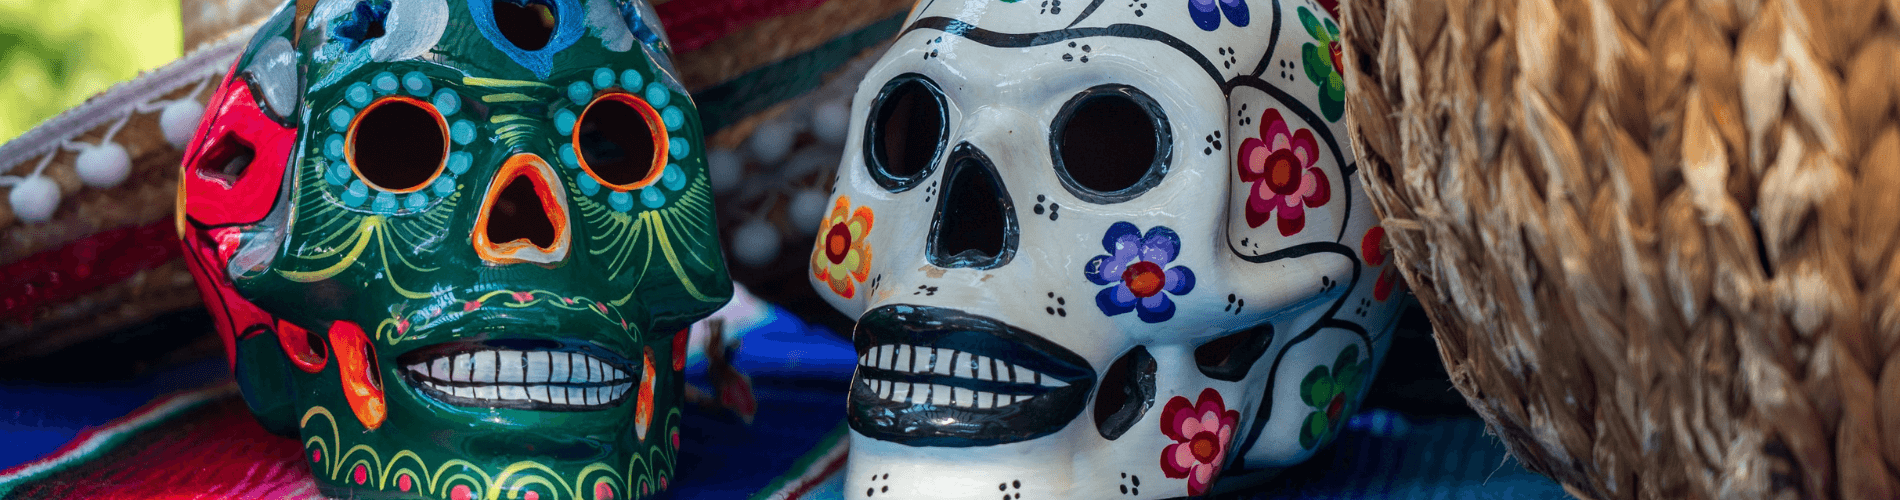 day of the dead 1900x500 (1).png